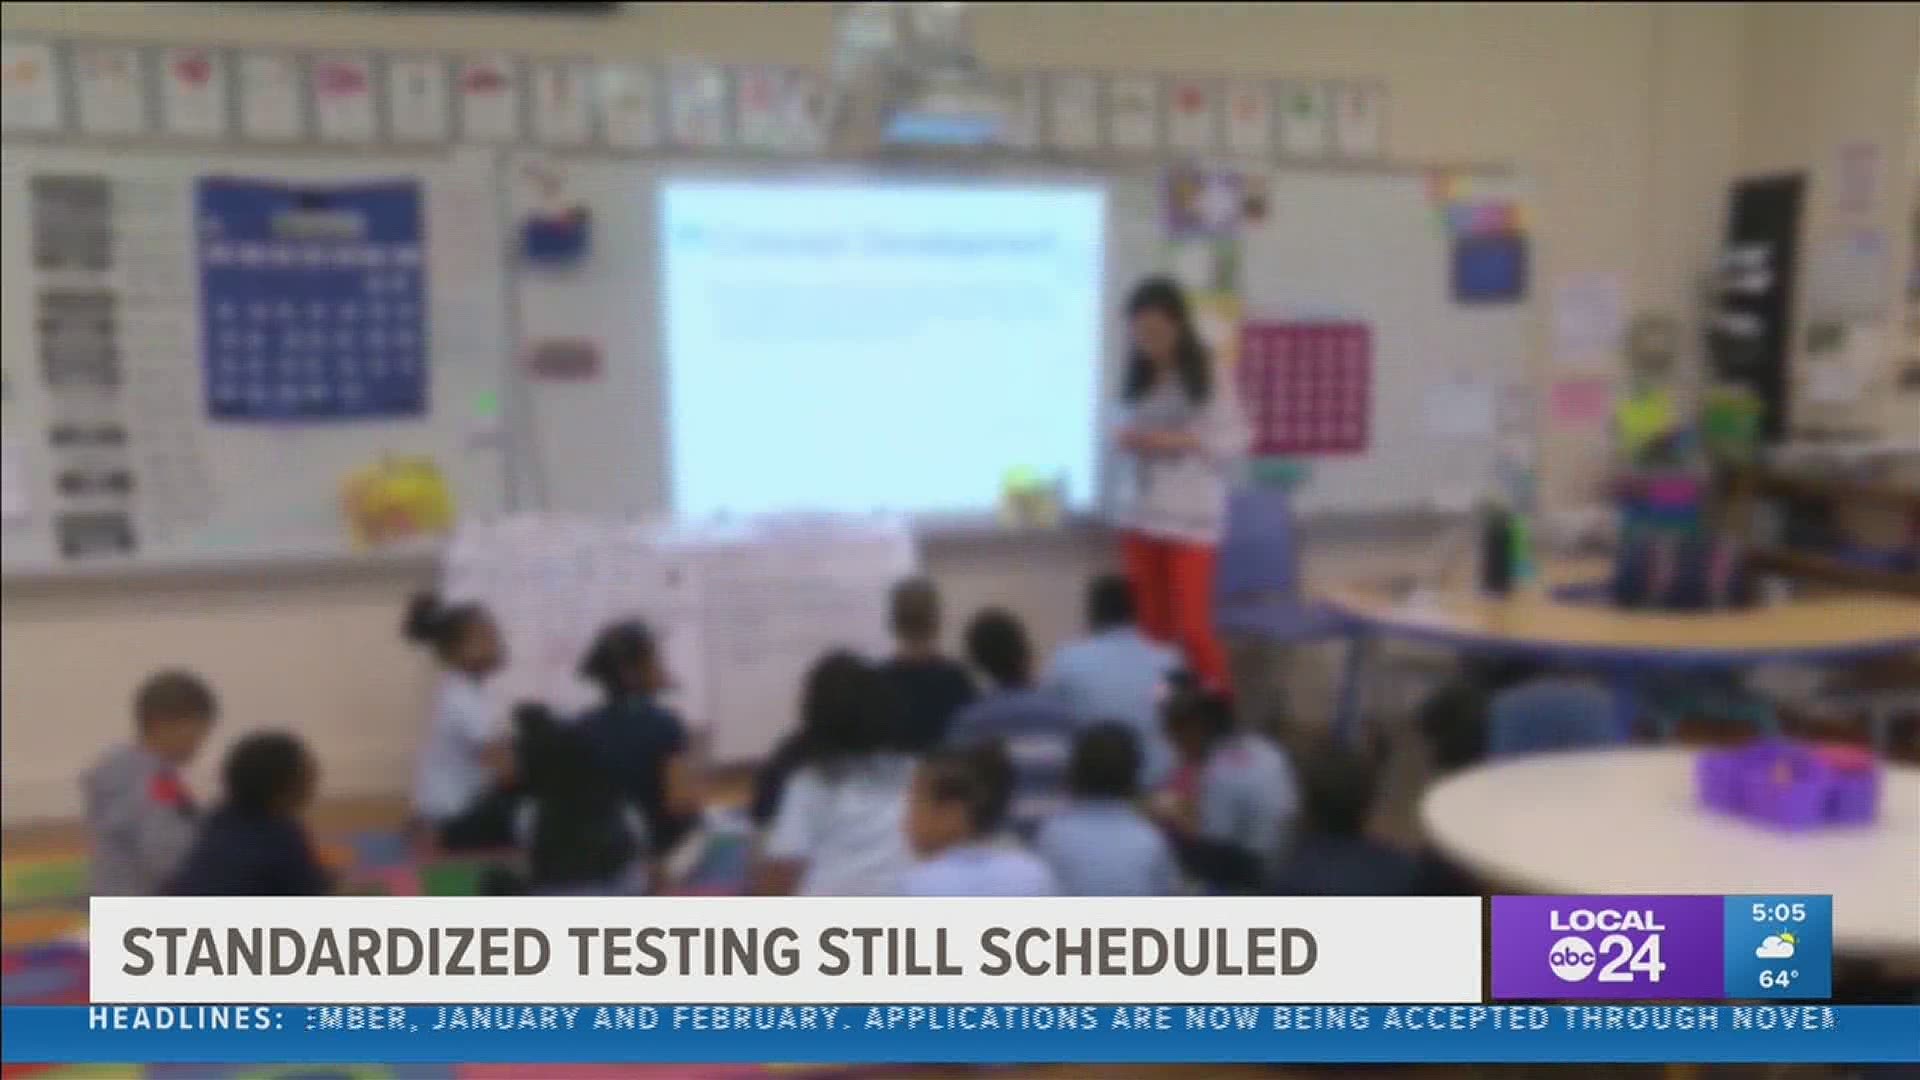 For evaluation purposes, the results of state mandated testing in Tennessee public schools will not be counted against teachers and schools because of COVID-19